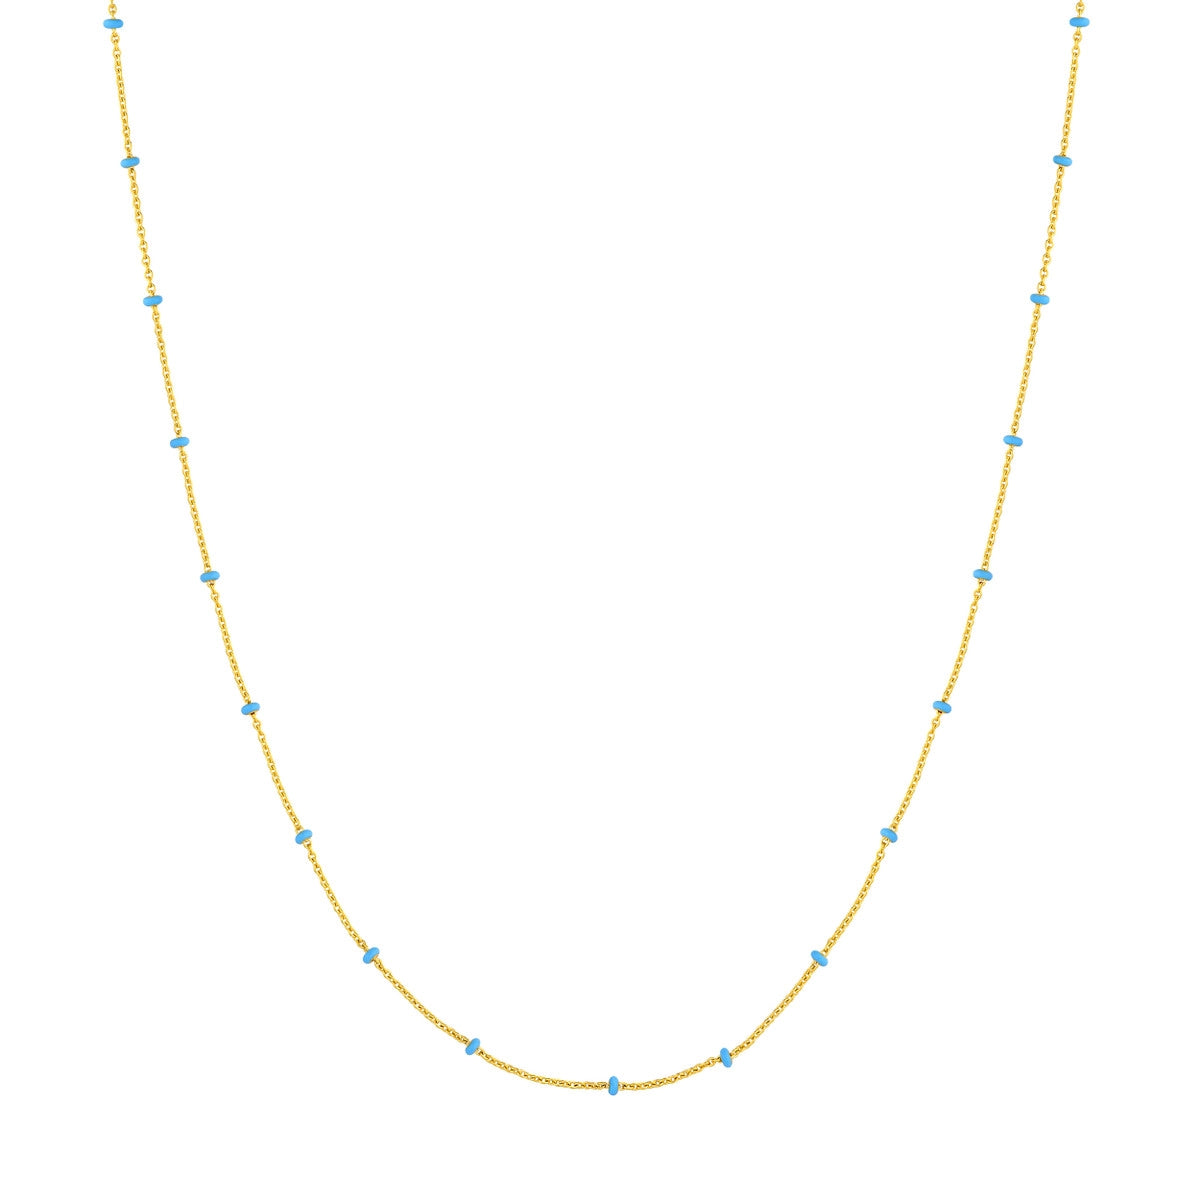 14K GOLD ROLO CHAIN WITH ENAMEL BEADS